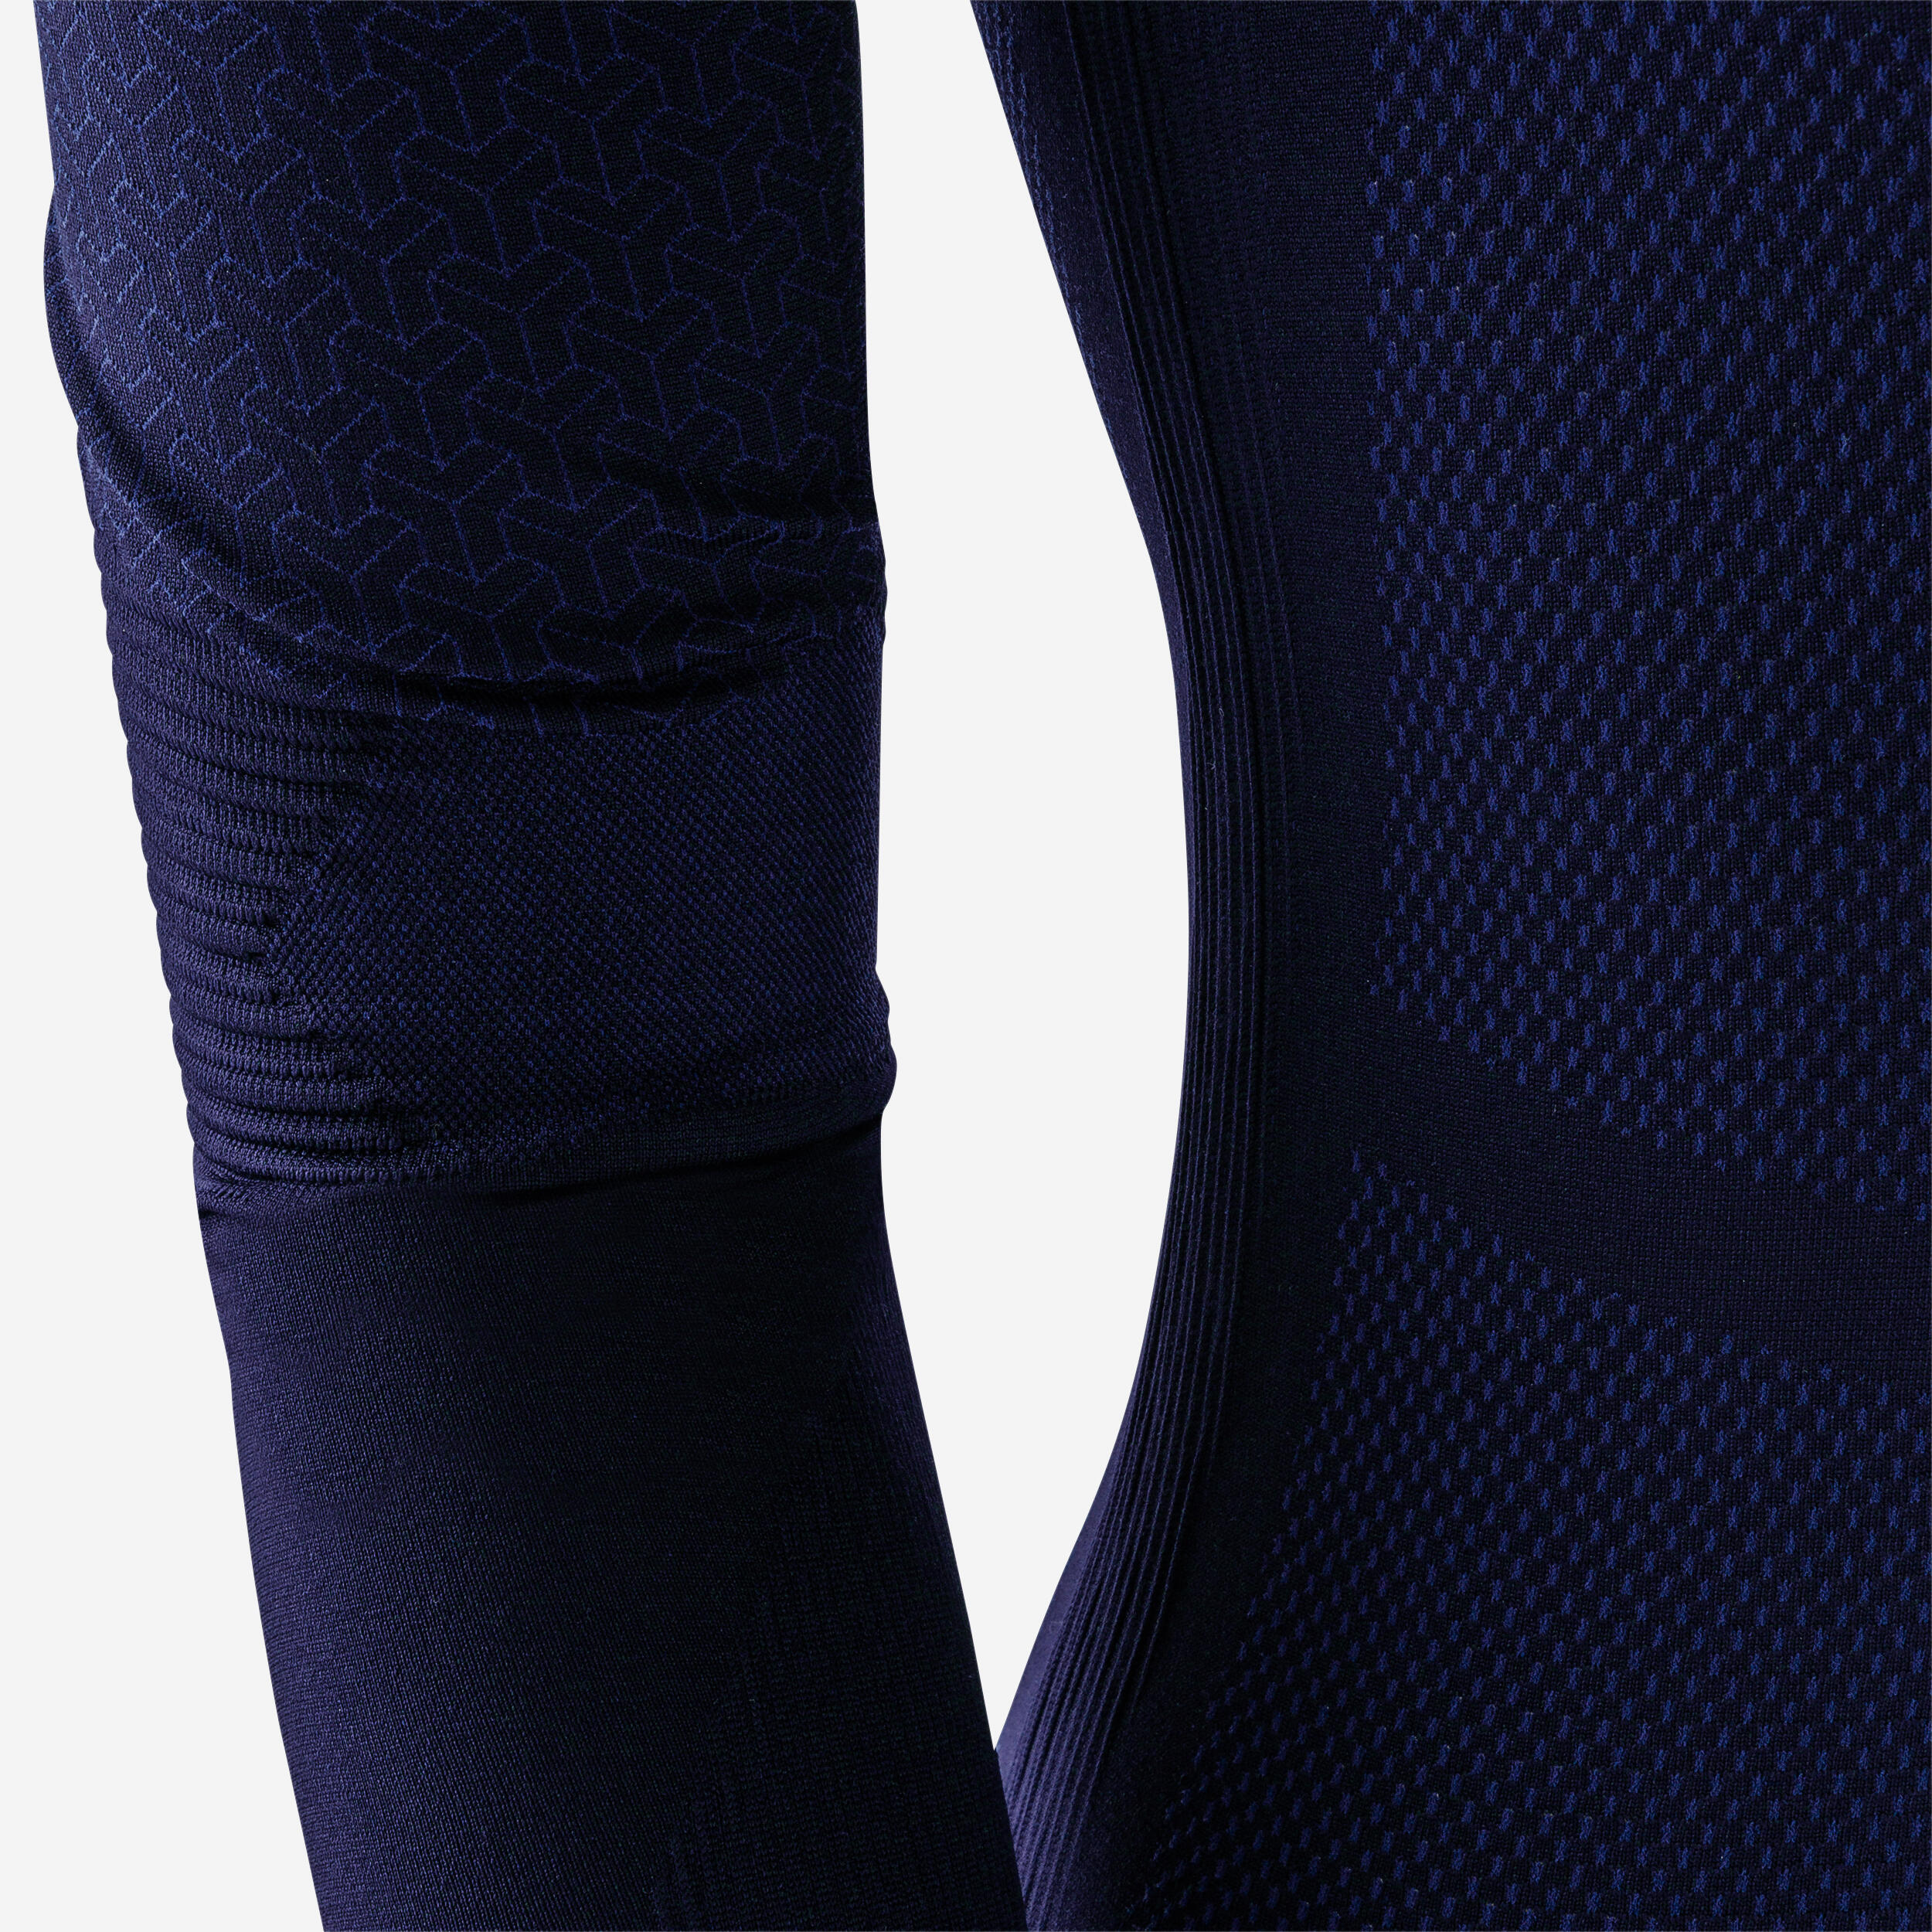 Adult Long-Sleeved Thermal Base Layer Top Keepdry 500 - Navy Blue 14/14